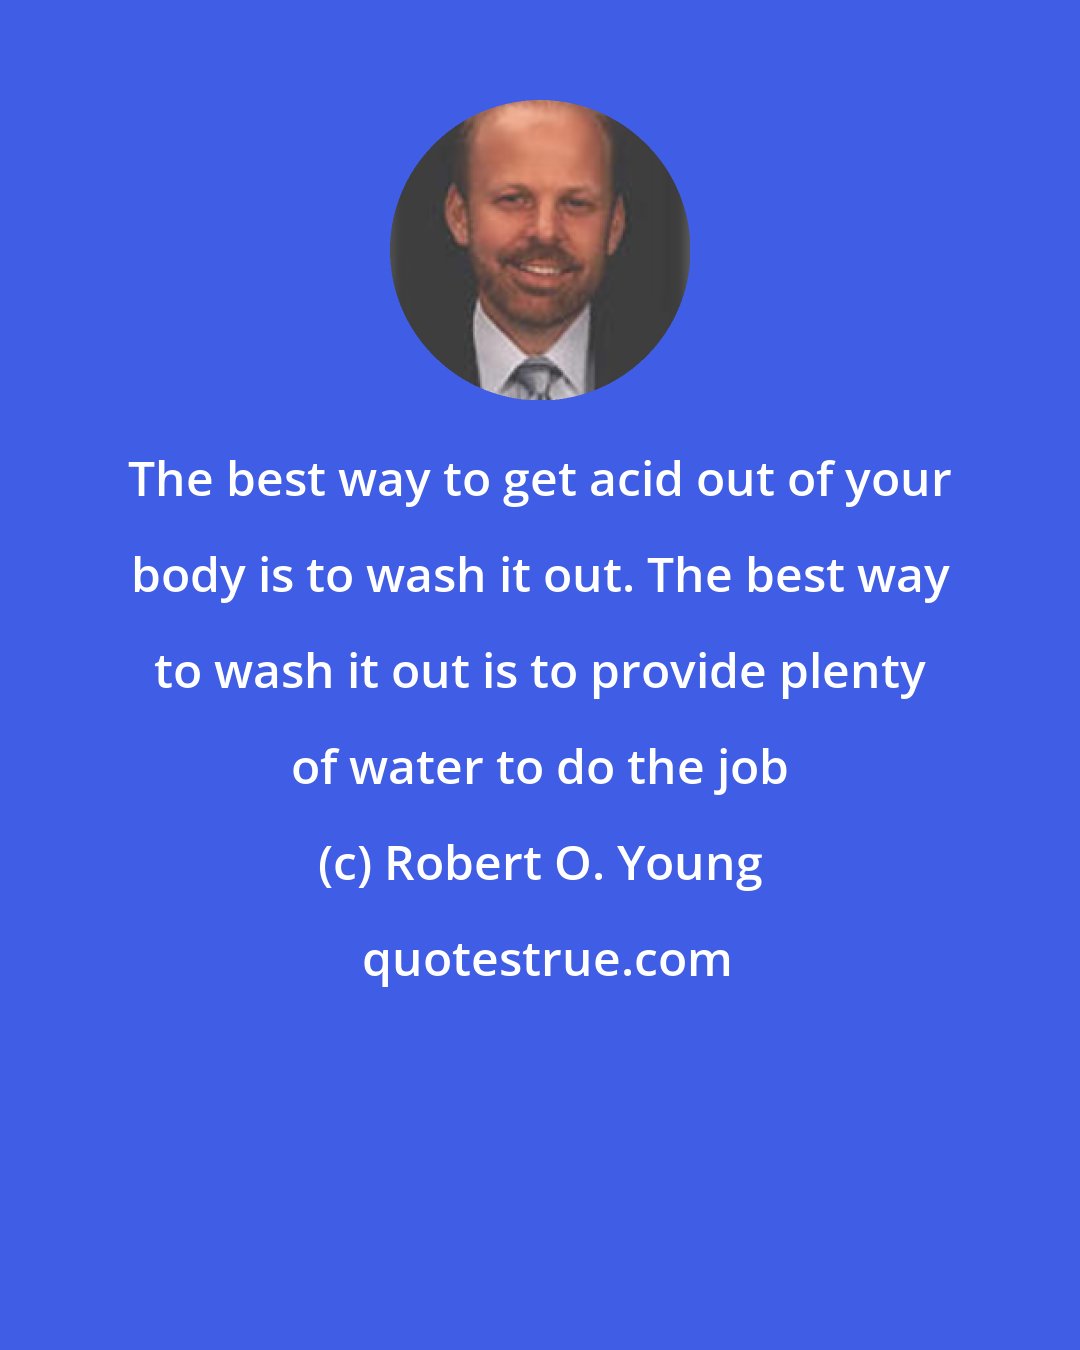 Robert O. Young: The best way to get acid out of your body is to wash it out. The best way to wash it out is to provide plenty of water to do the job